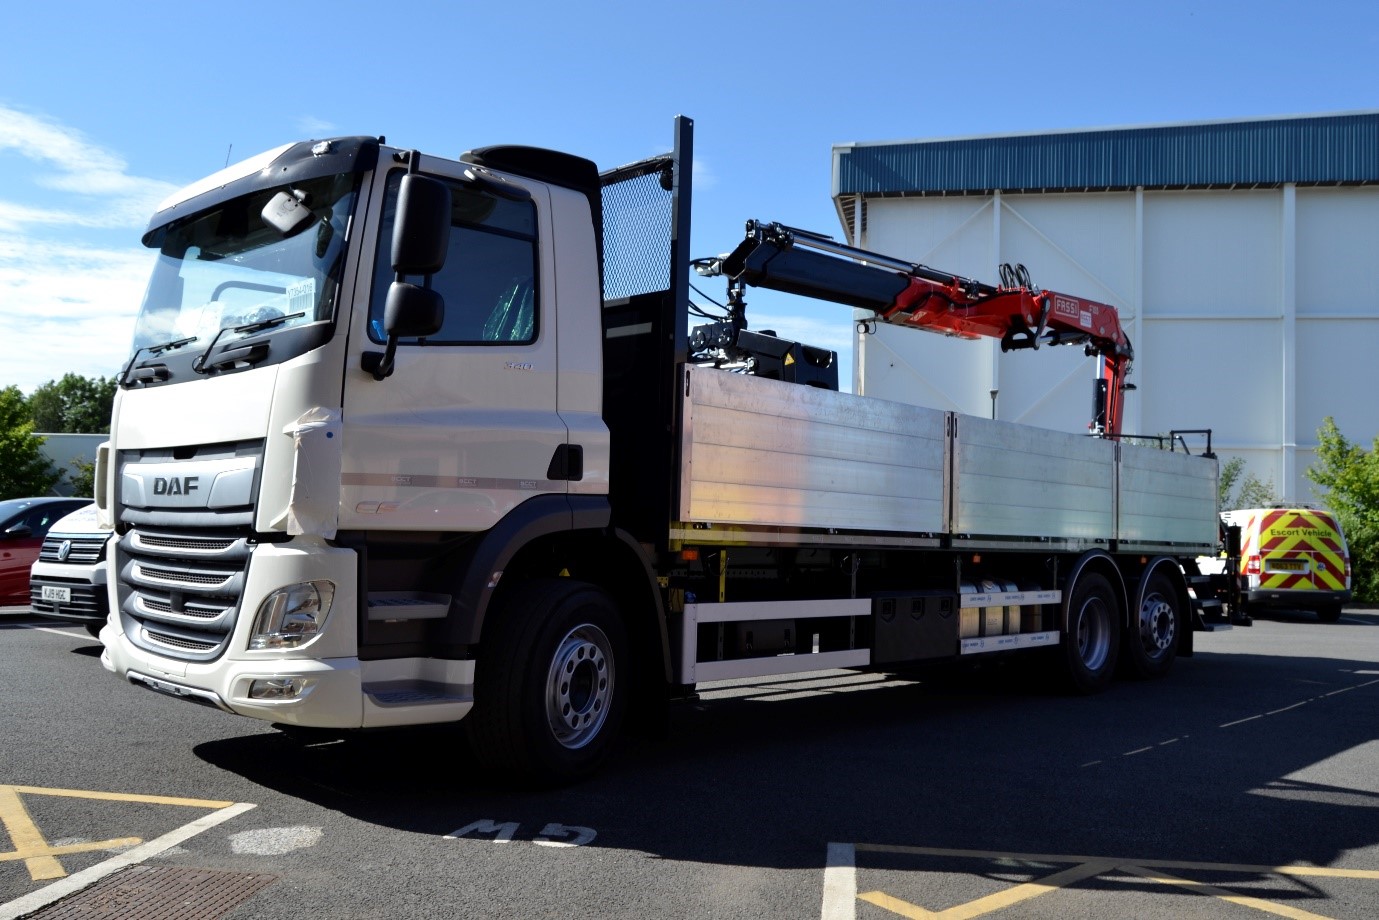 Fassi is the way for Leeds Commercial